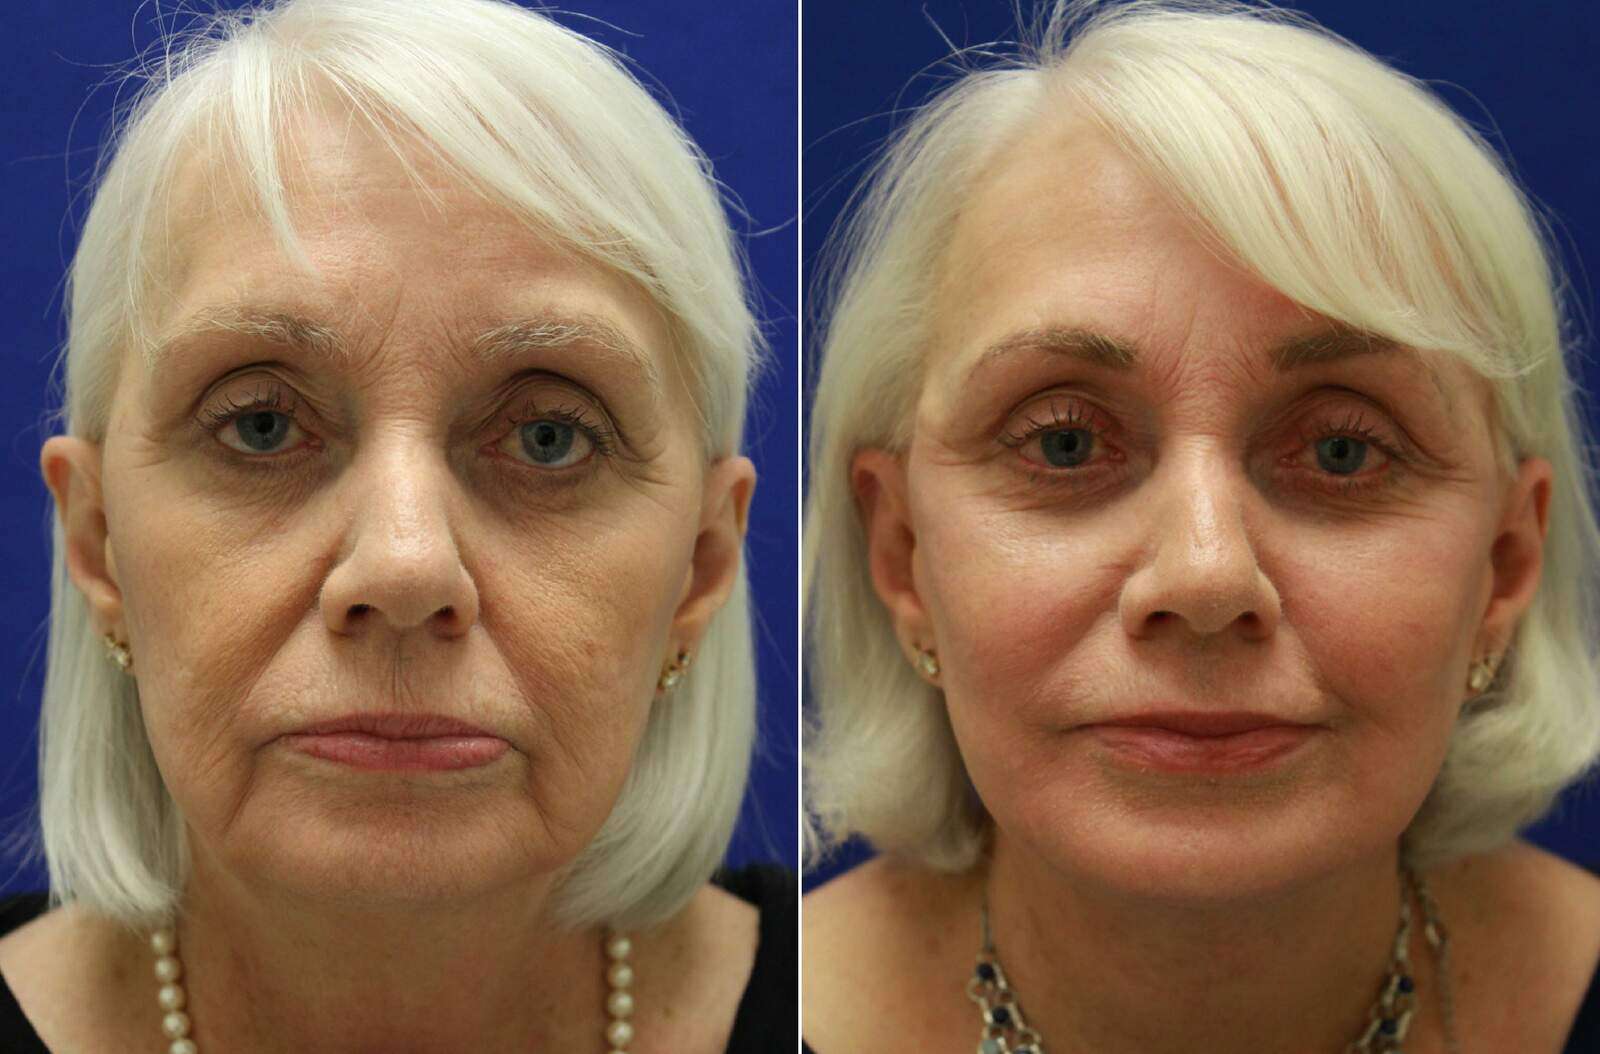  Before and After Photos in , , Facelift